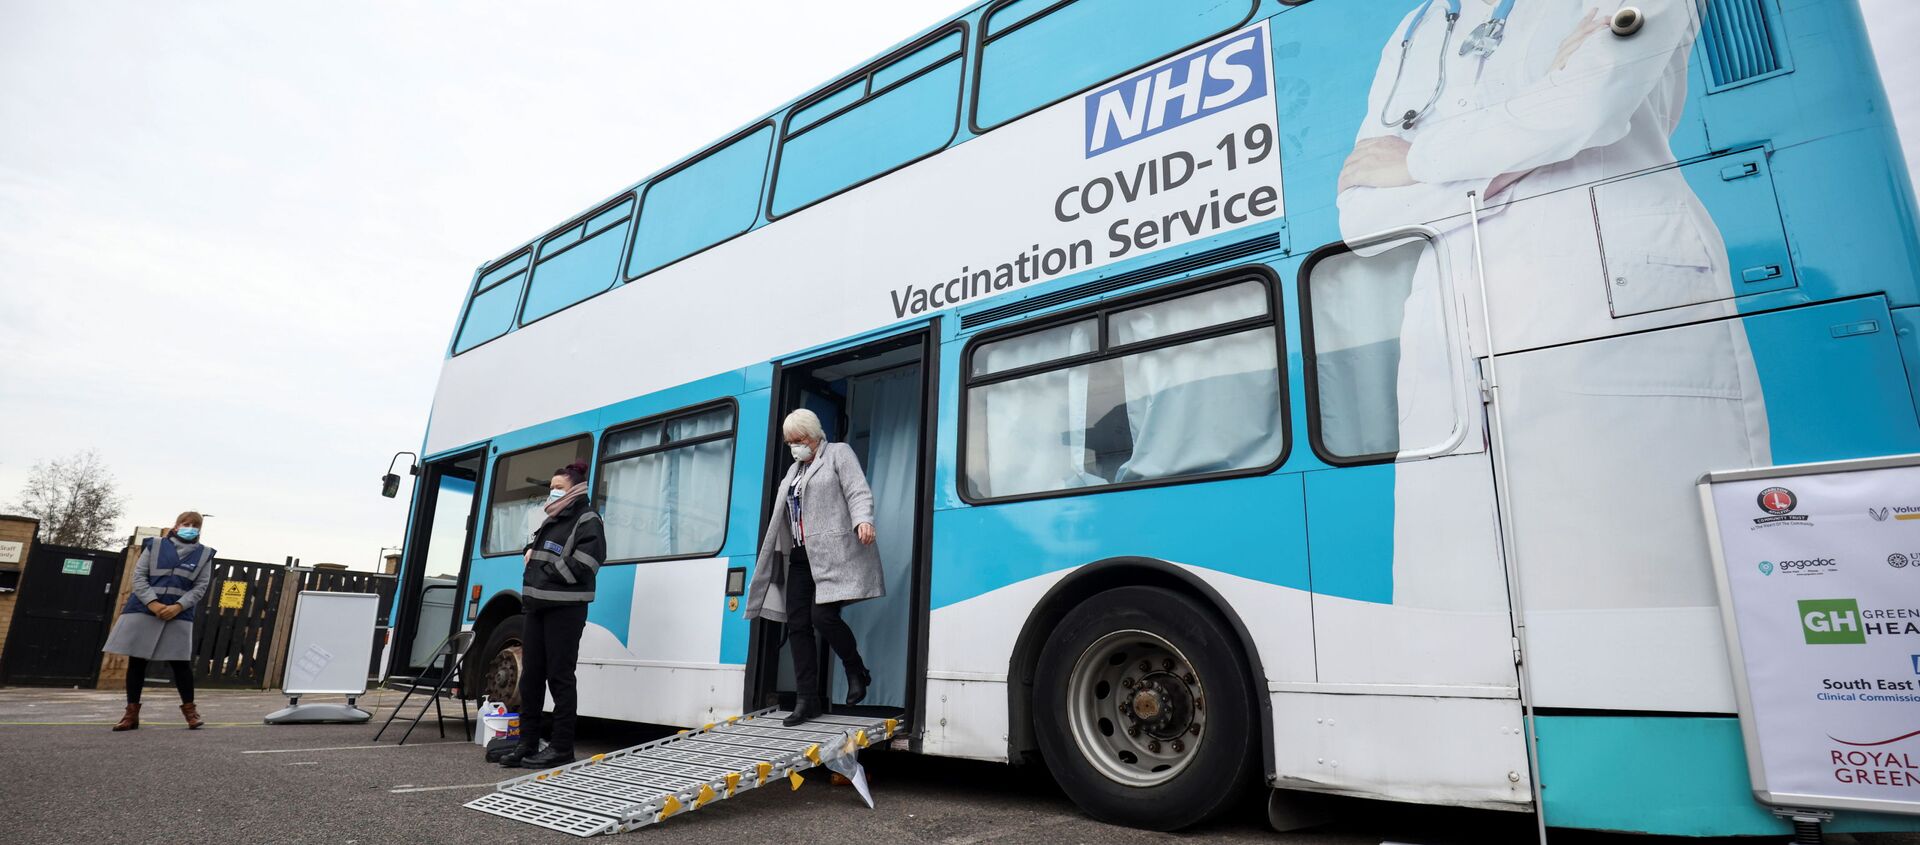 A person gets off a mobile vaccination centre for the coronavirus disease (COVID-19) after receiving the vaccine, in Thamesmead, London, Britain, February 14, 2021. - Sputnik International, 1920, 15.02.2021